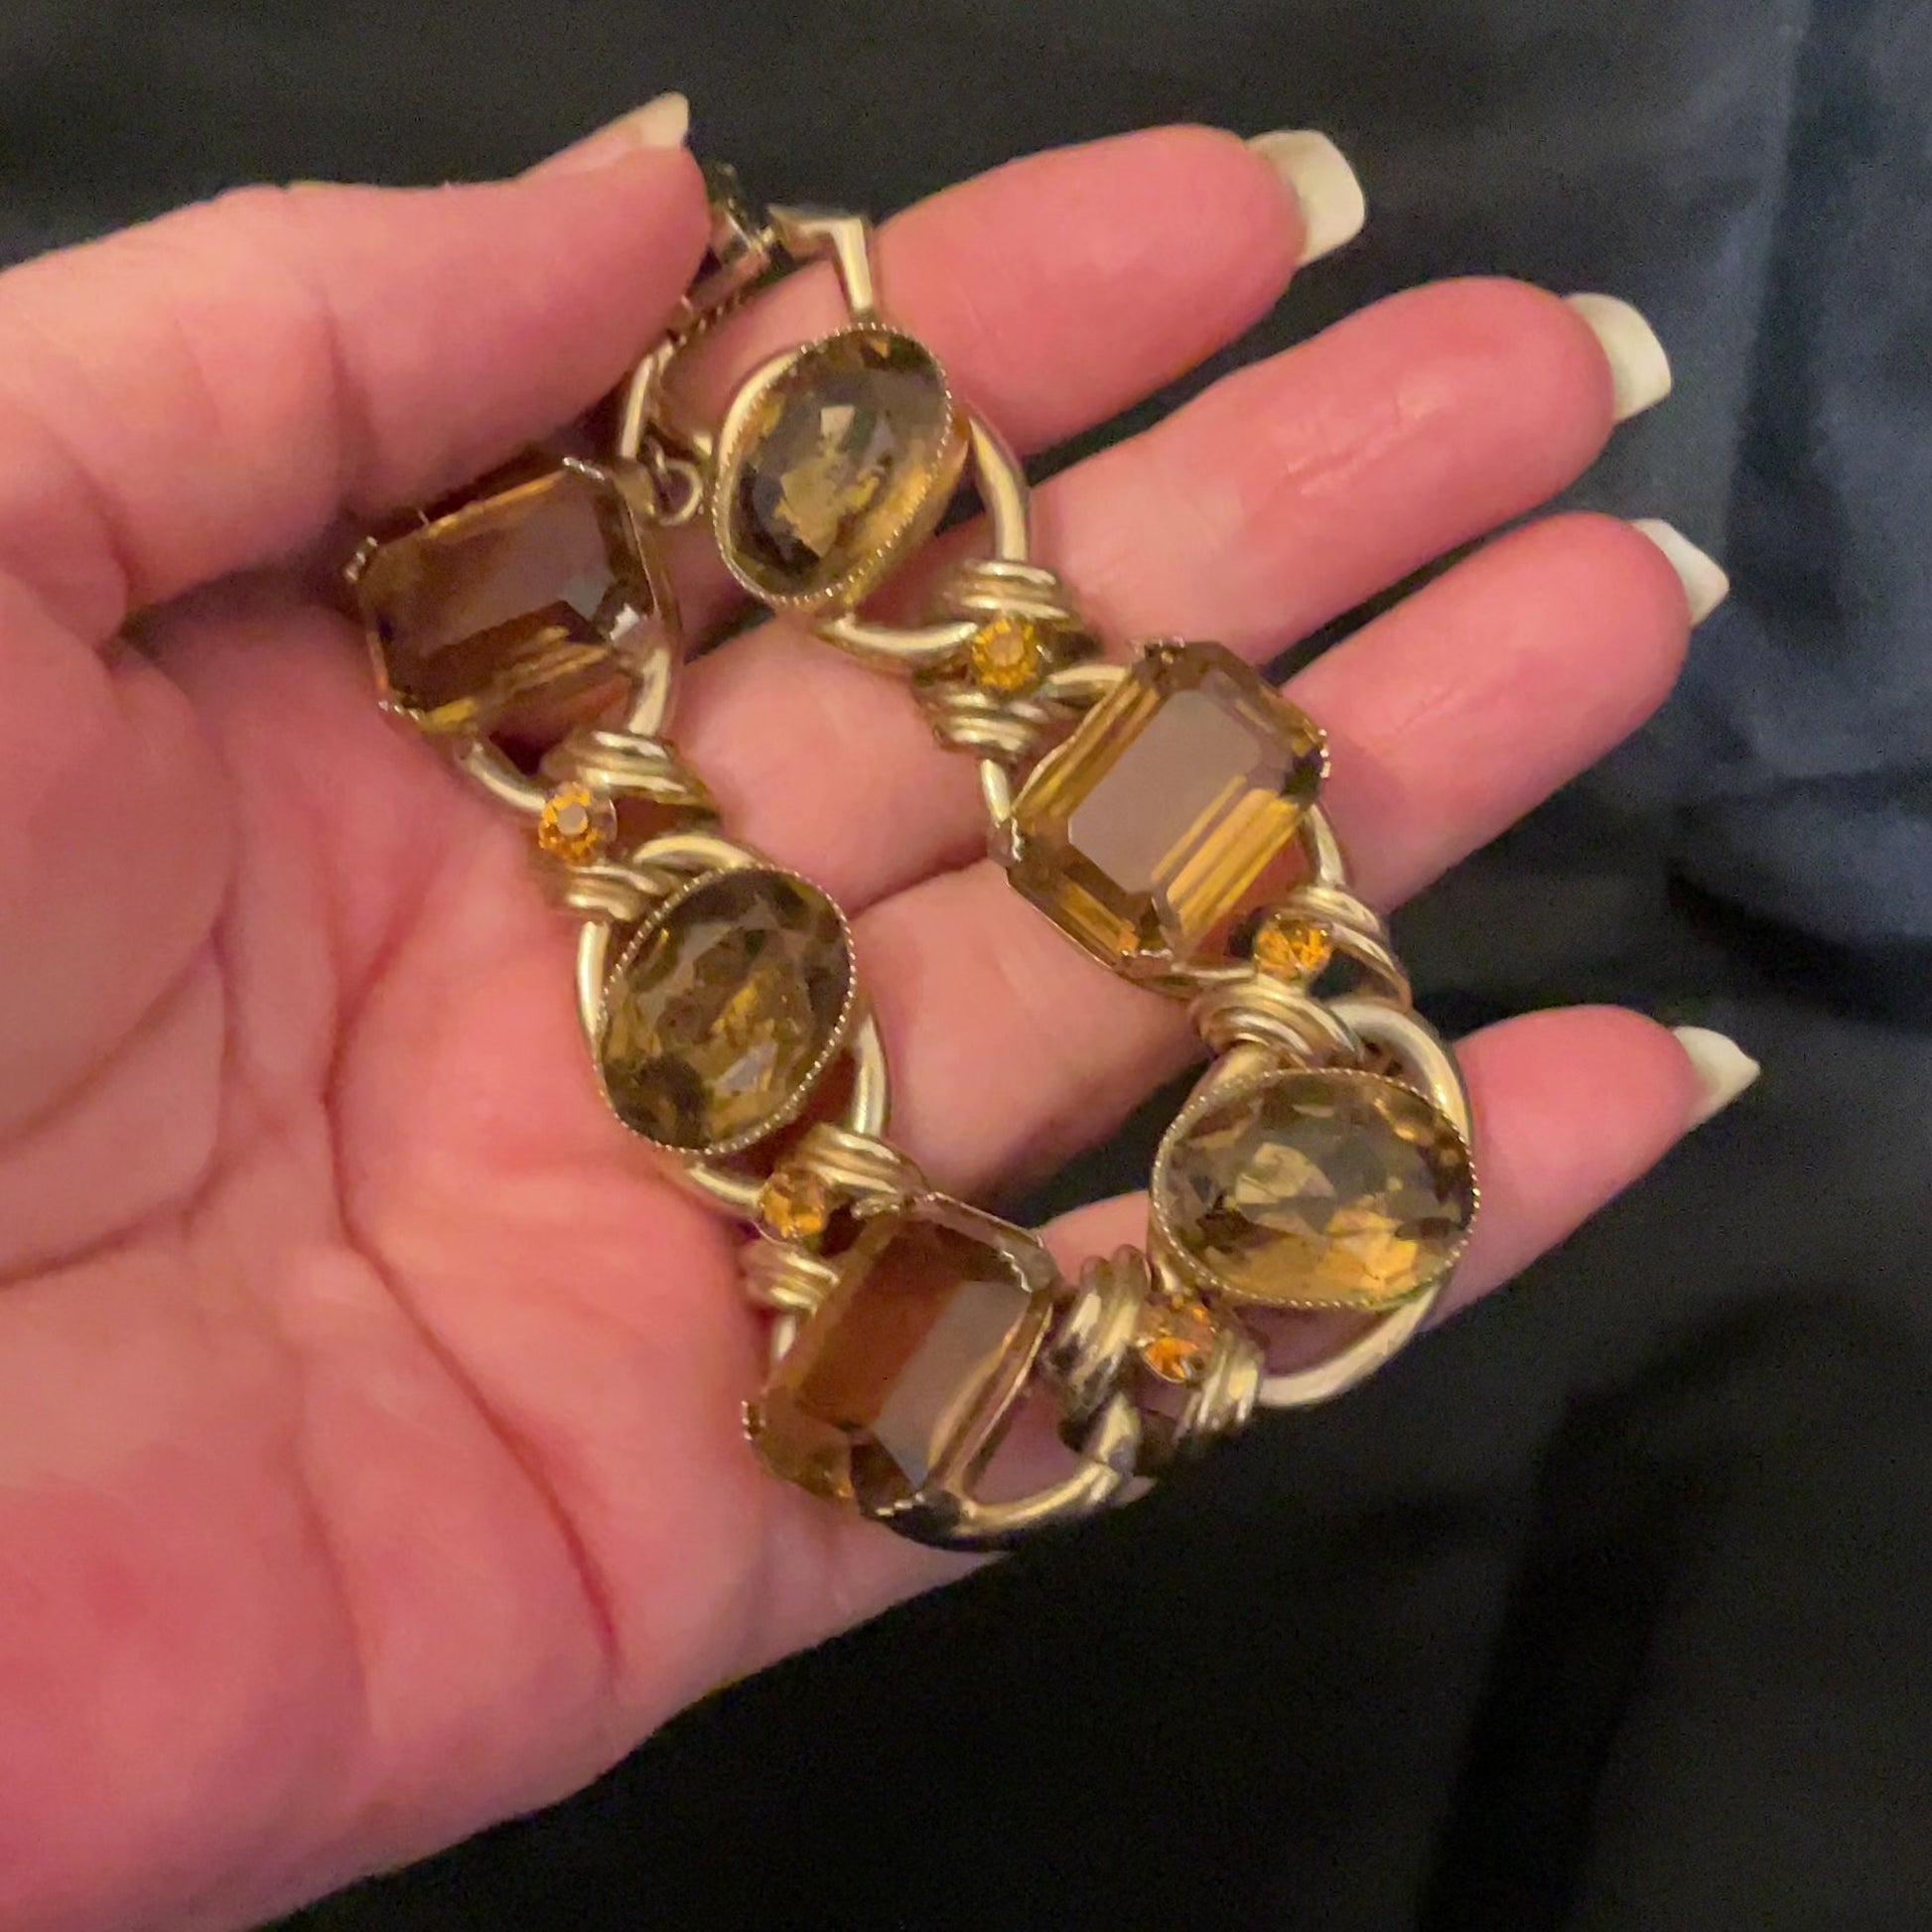 Chunky Topaz and Citrine Color Vintage Rhinestone Bracelet video showing how the rhinestones sparkle in the light.